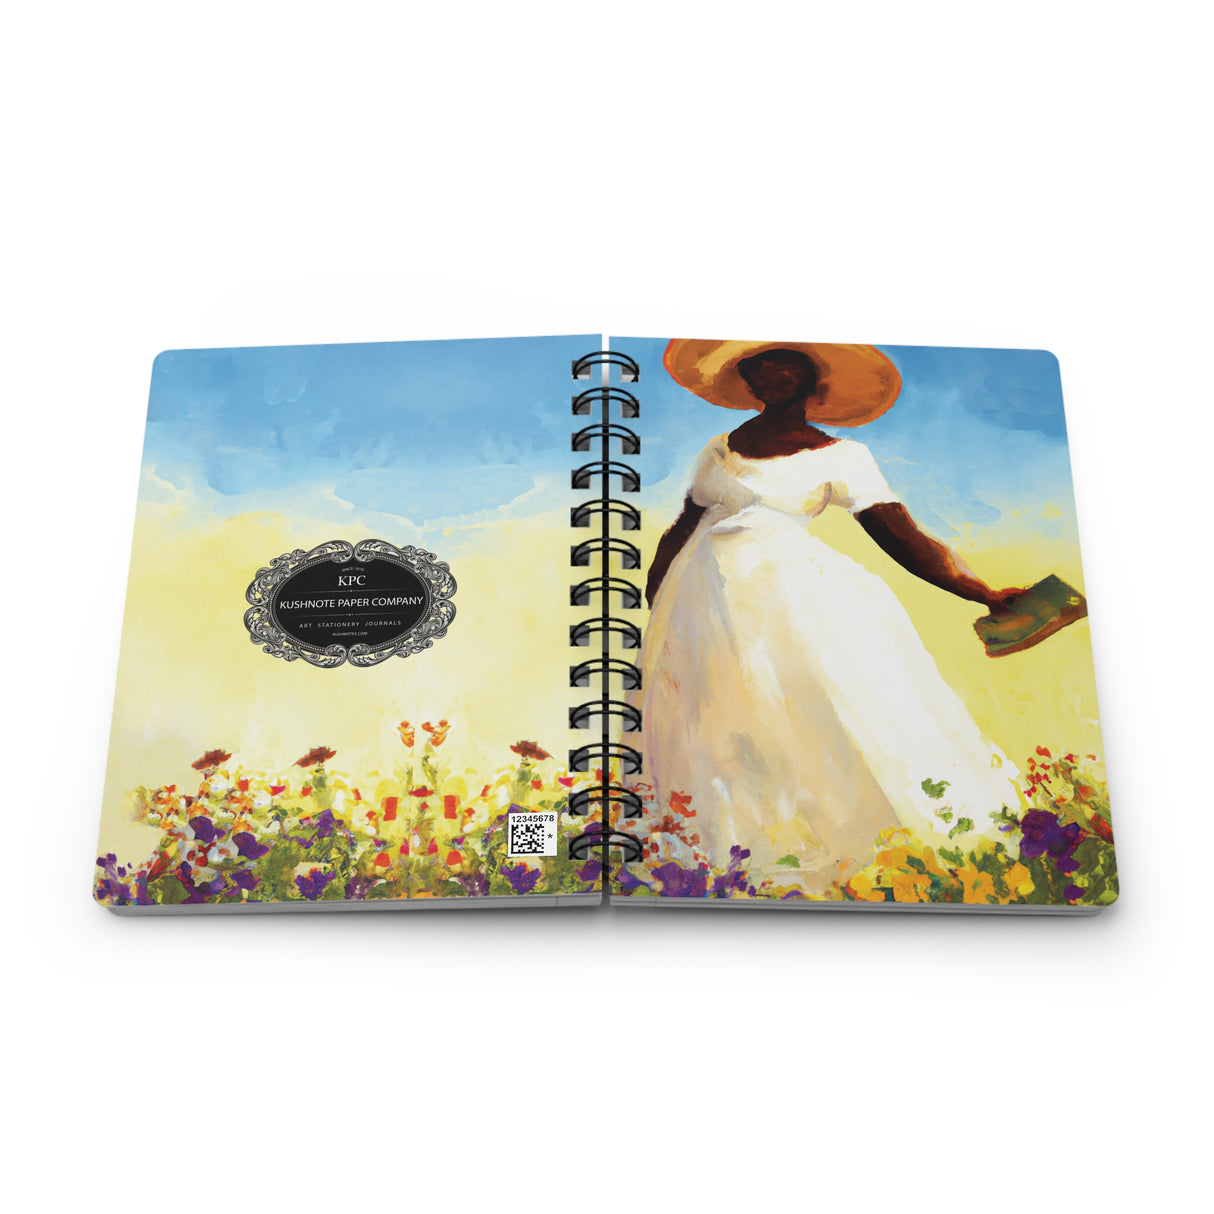 The Word Spiral Bound Journal & Notebooks with 2023 -2024 Year-at-a-glance calendar